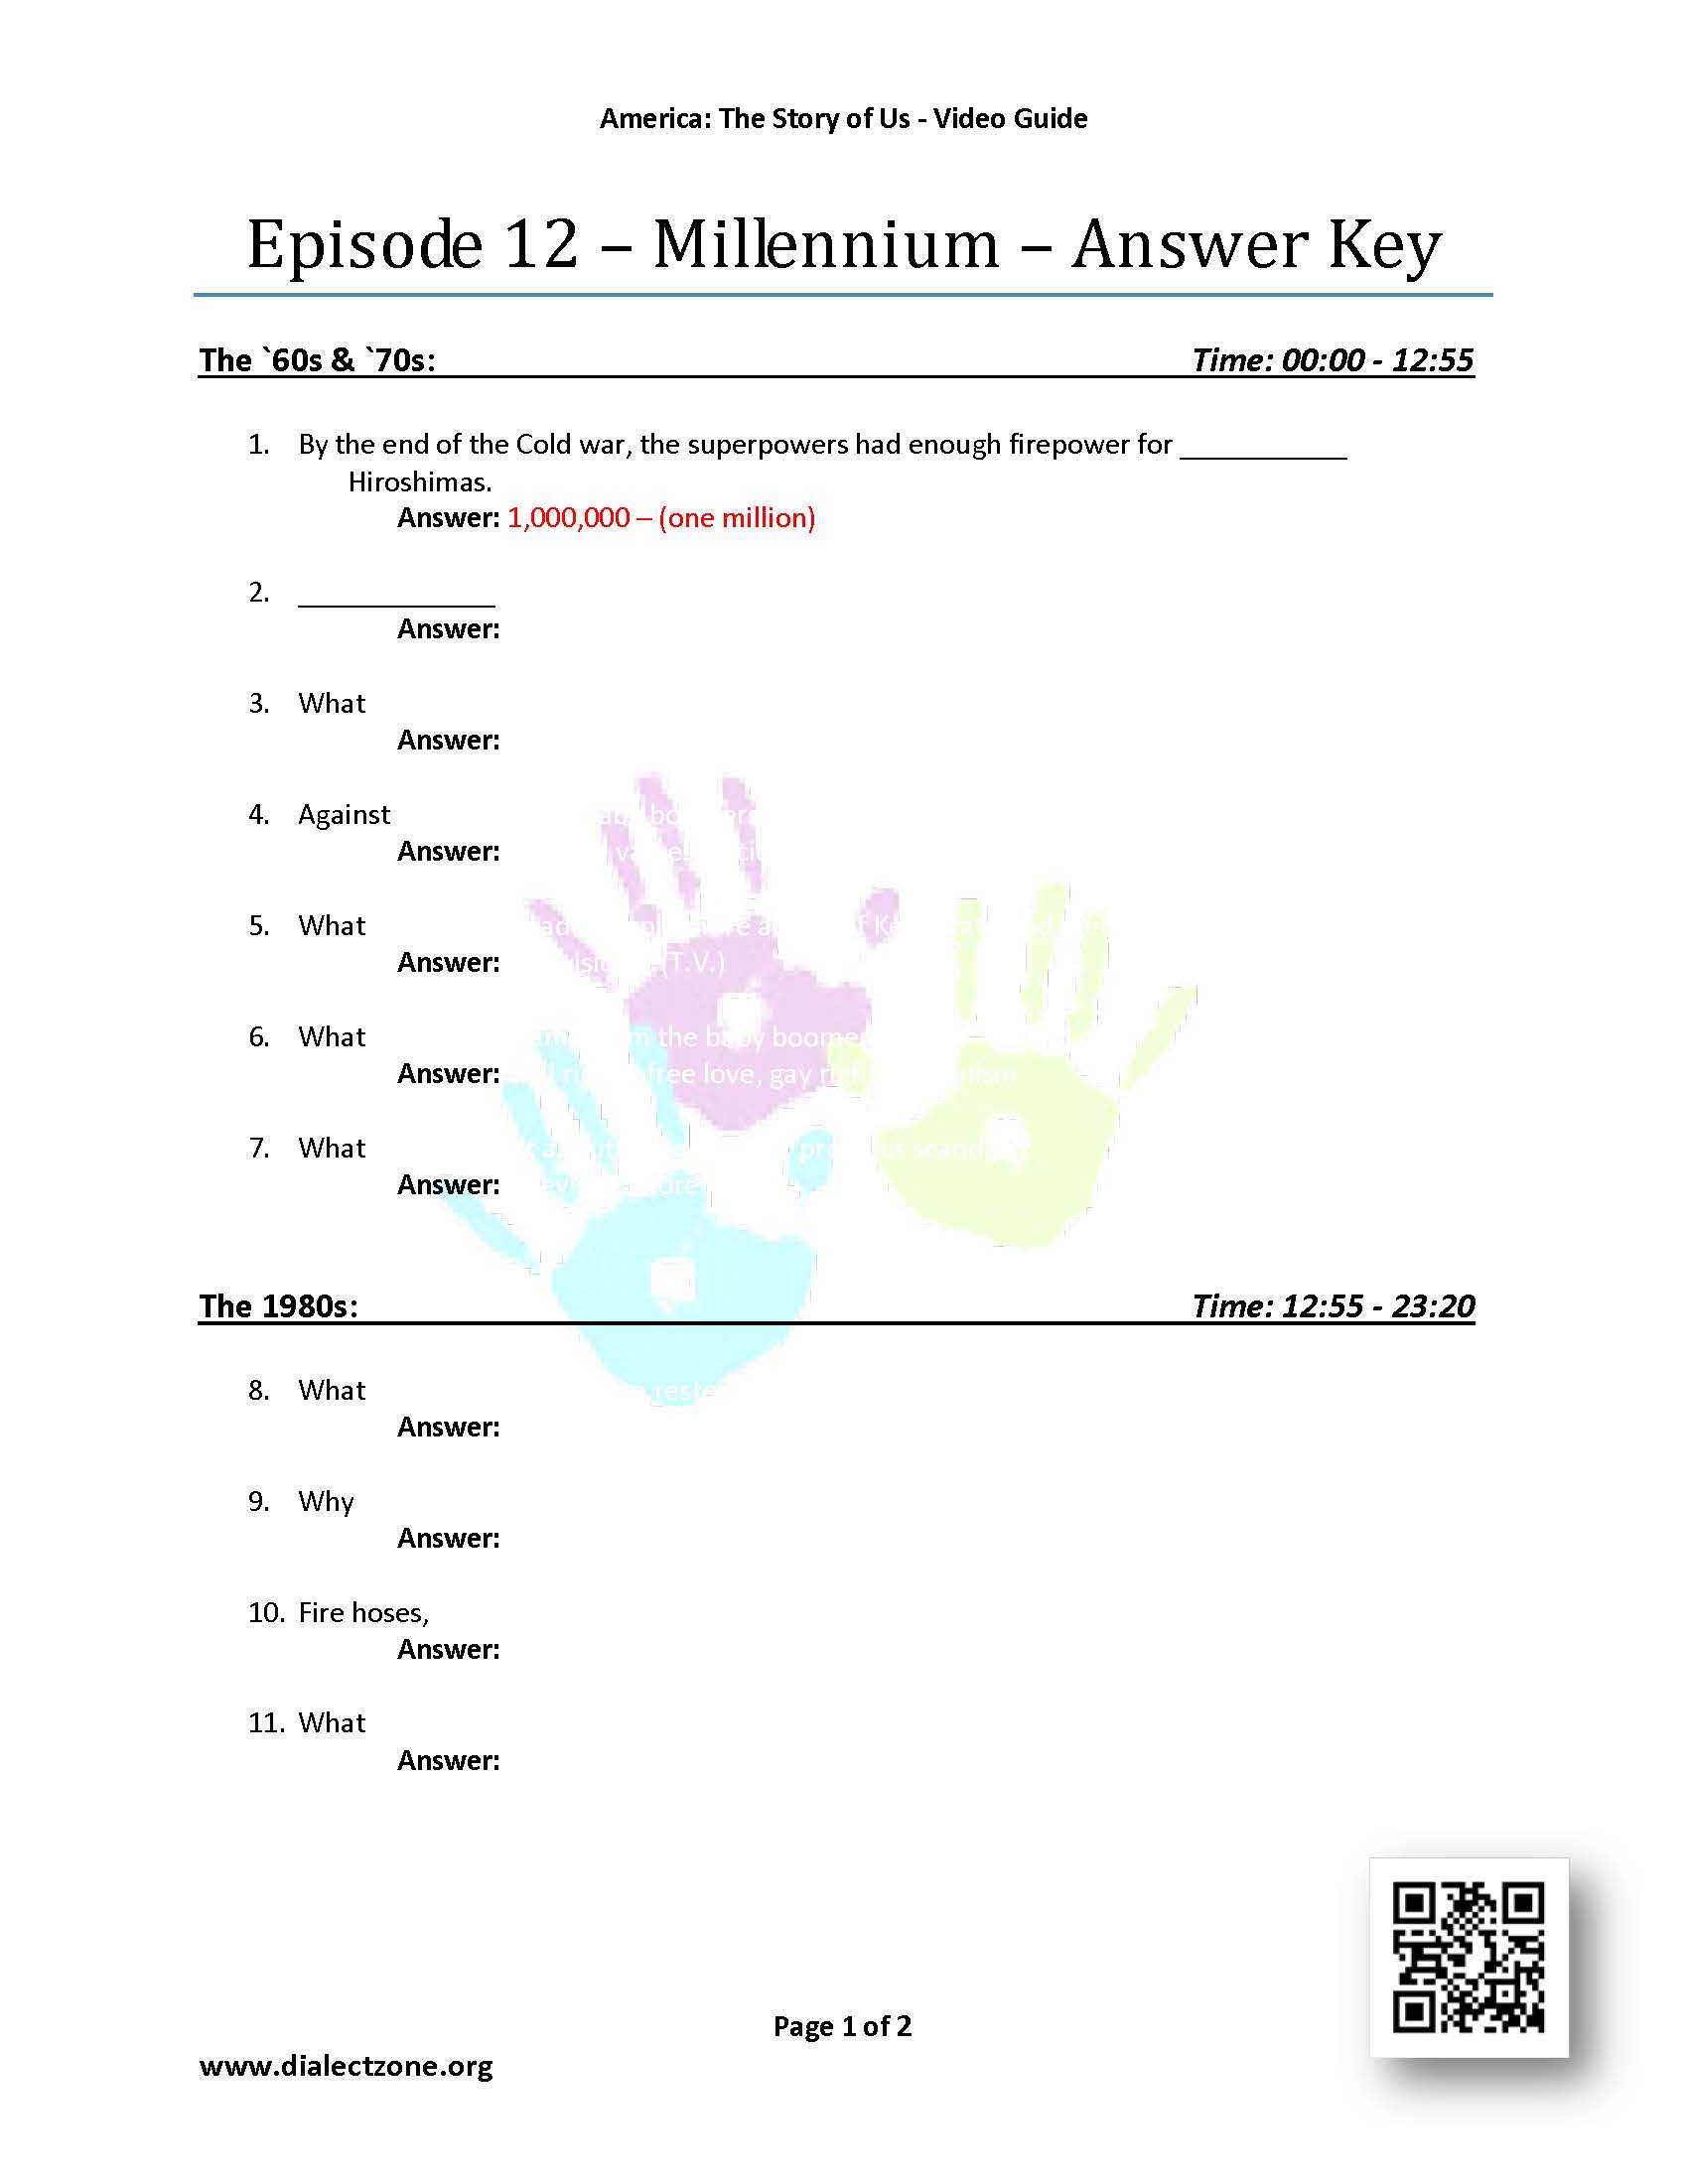 America the Story Of Us Millennium Worksheet Answers and Free Worksheets Library Download and Print Worksheets